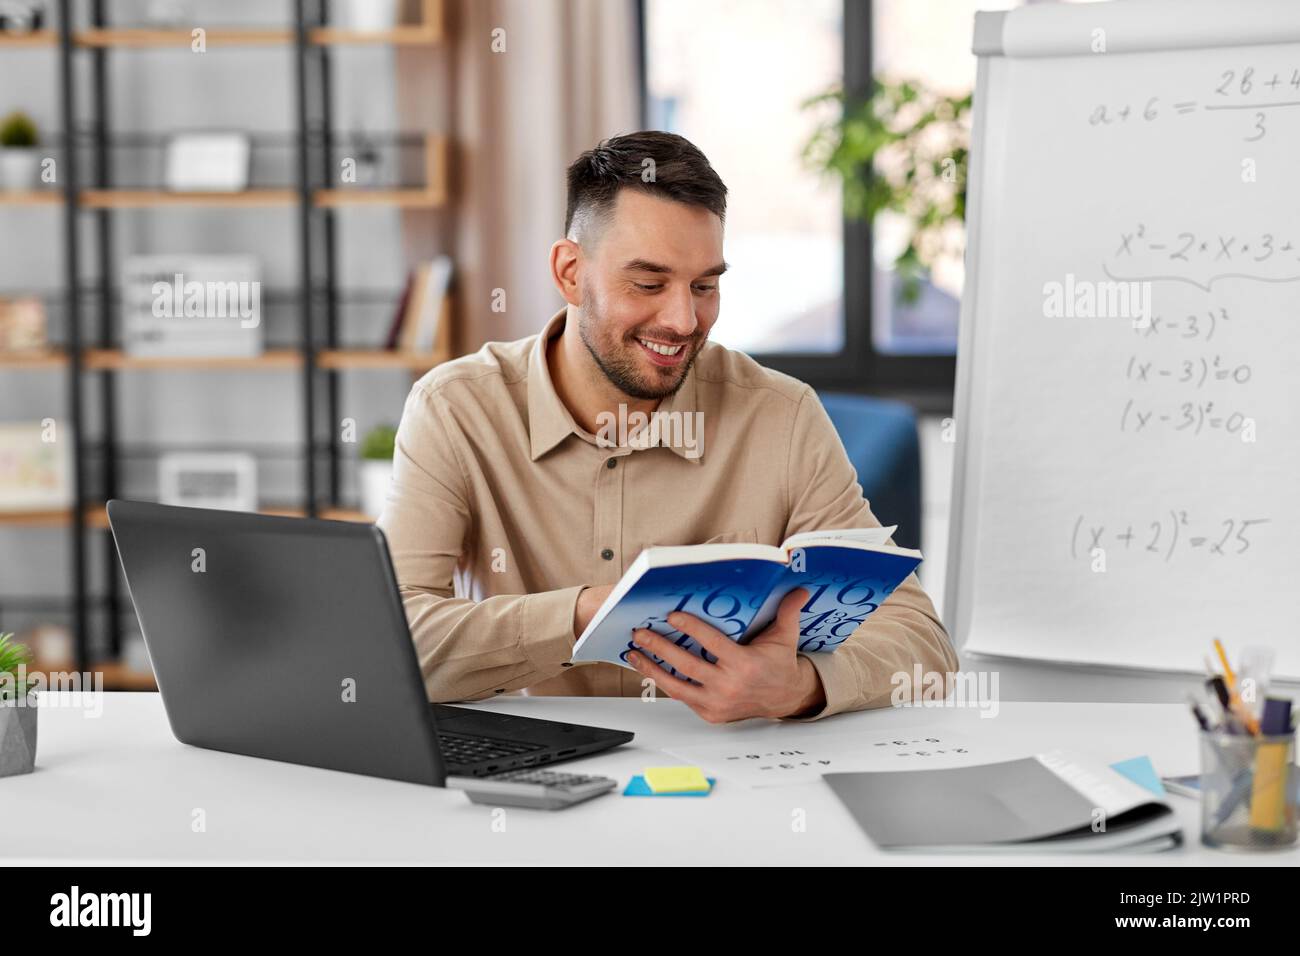 math teacher with laptop and book at home office Stock Photo